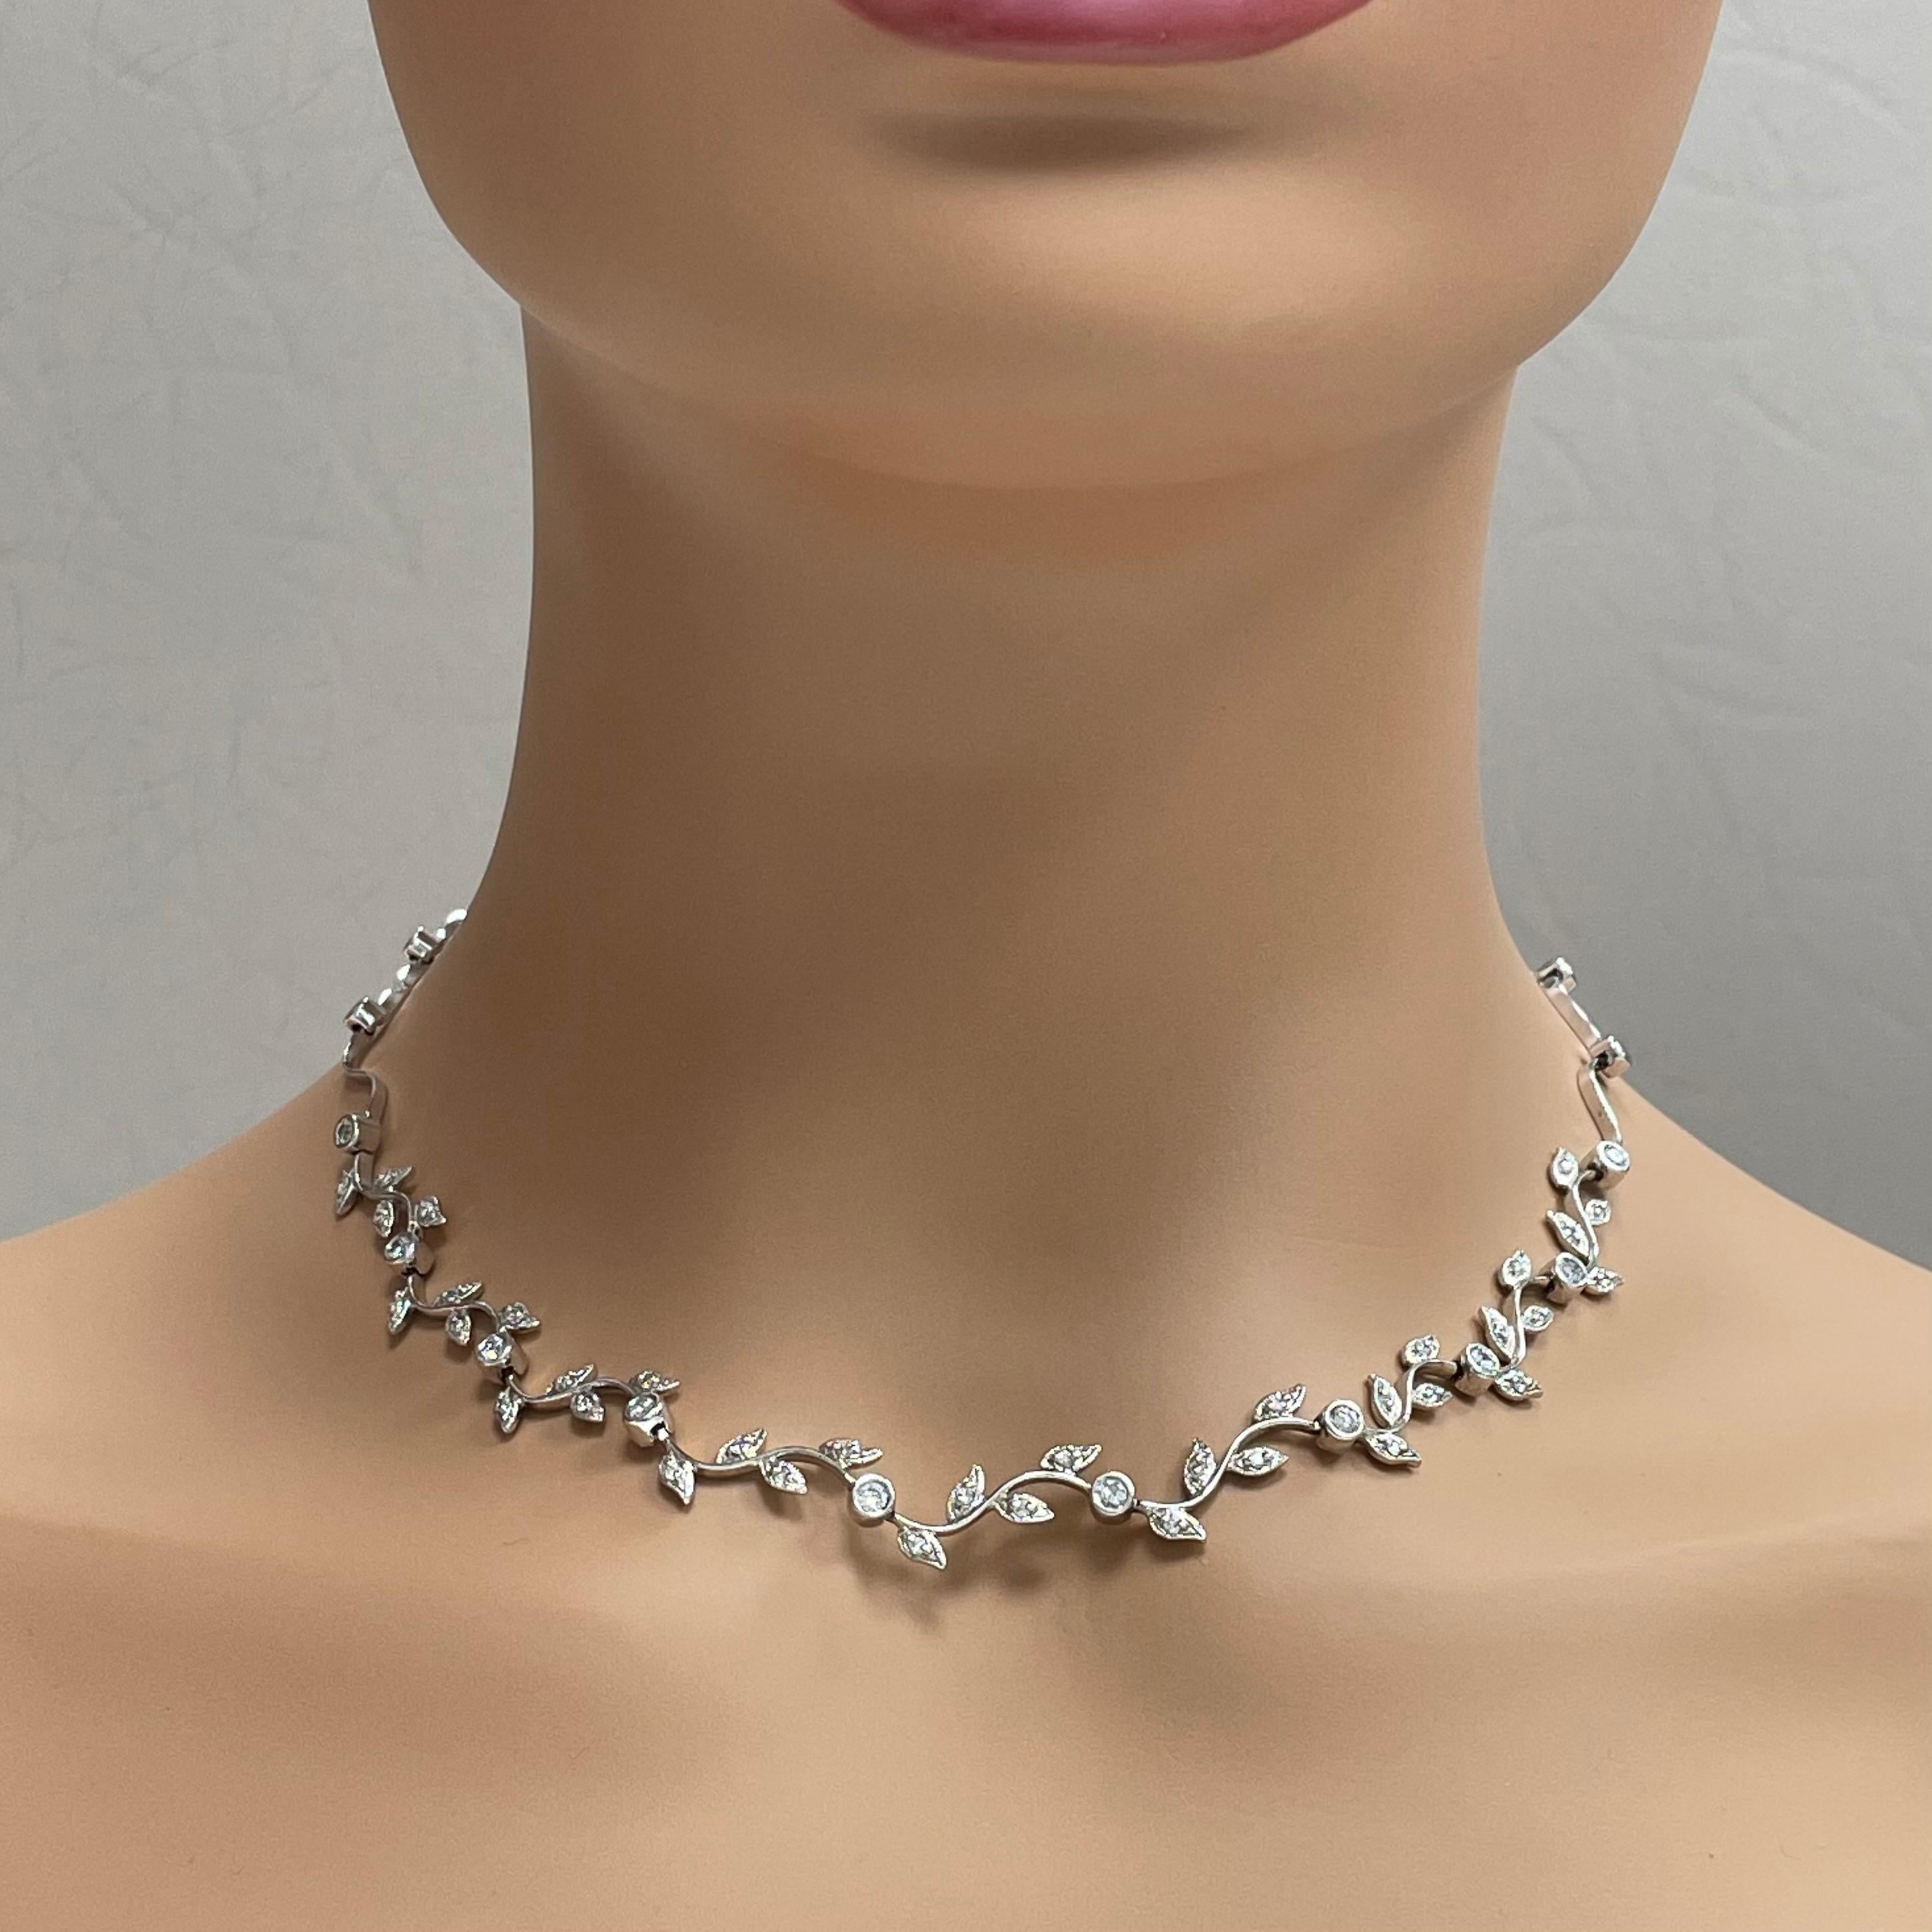 The Grape Vine Necklace is a delicate accessory that reflects a touch of nature. 

Total Diamond Weight: 1.25 ct 
Diamond Color: G - H 
Diamond Clarity: SI (Slightly Included) 

Metal: 14K White Gold 
Metal Wt: 20.00 gms 
Setting: Bezel & Prong